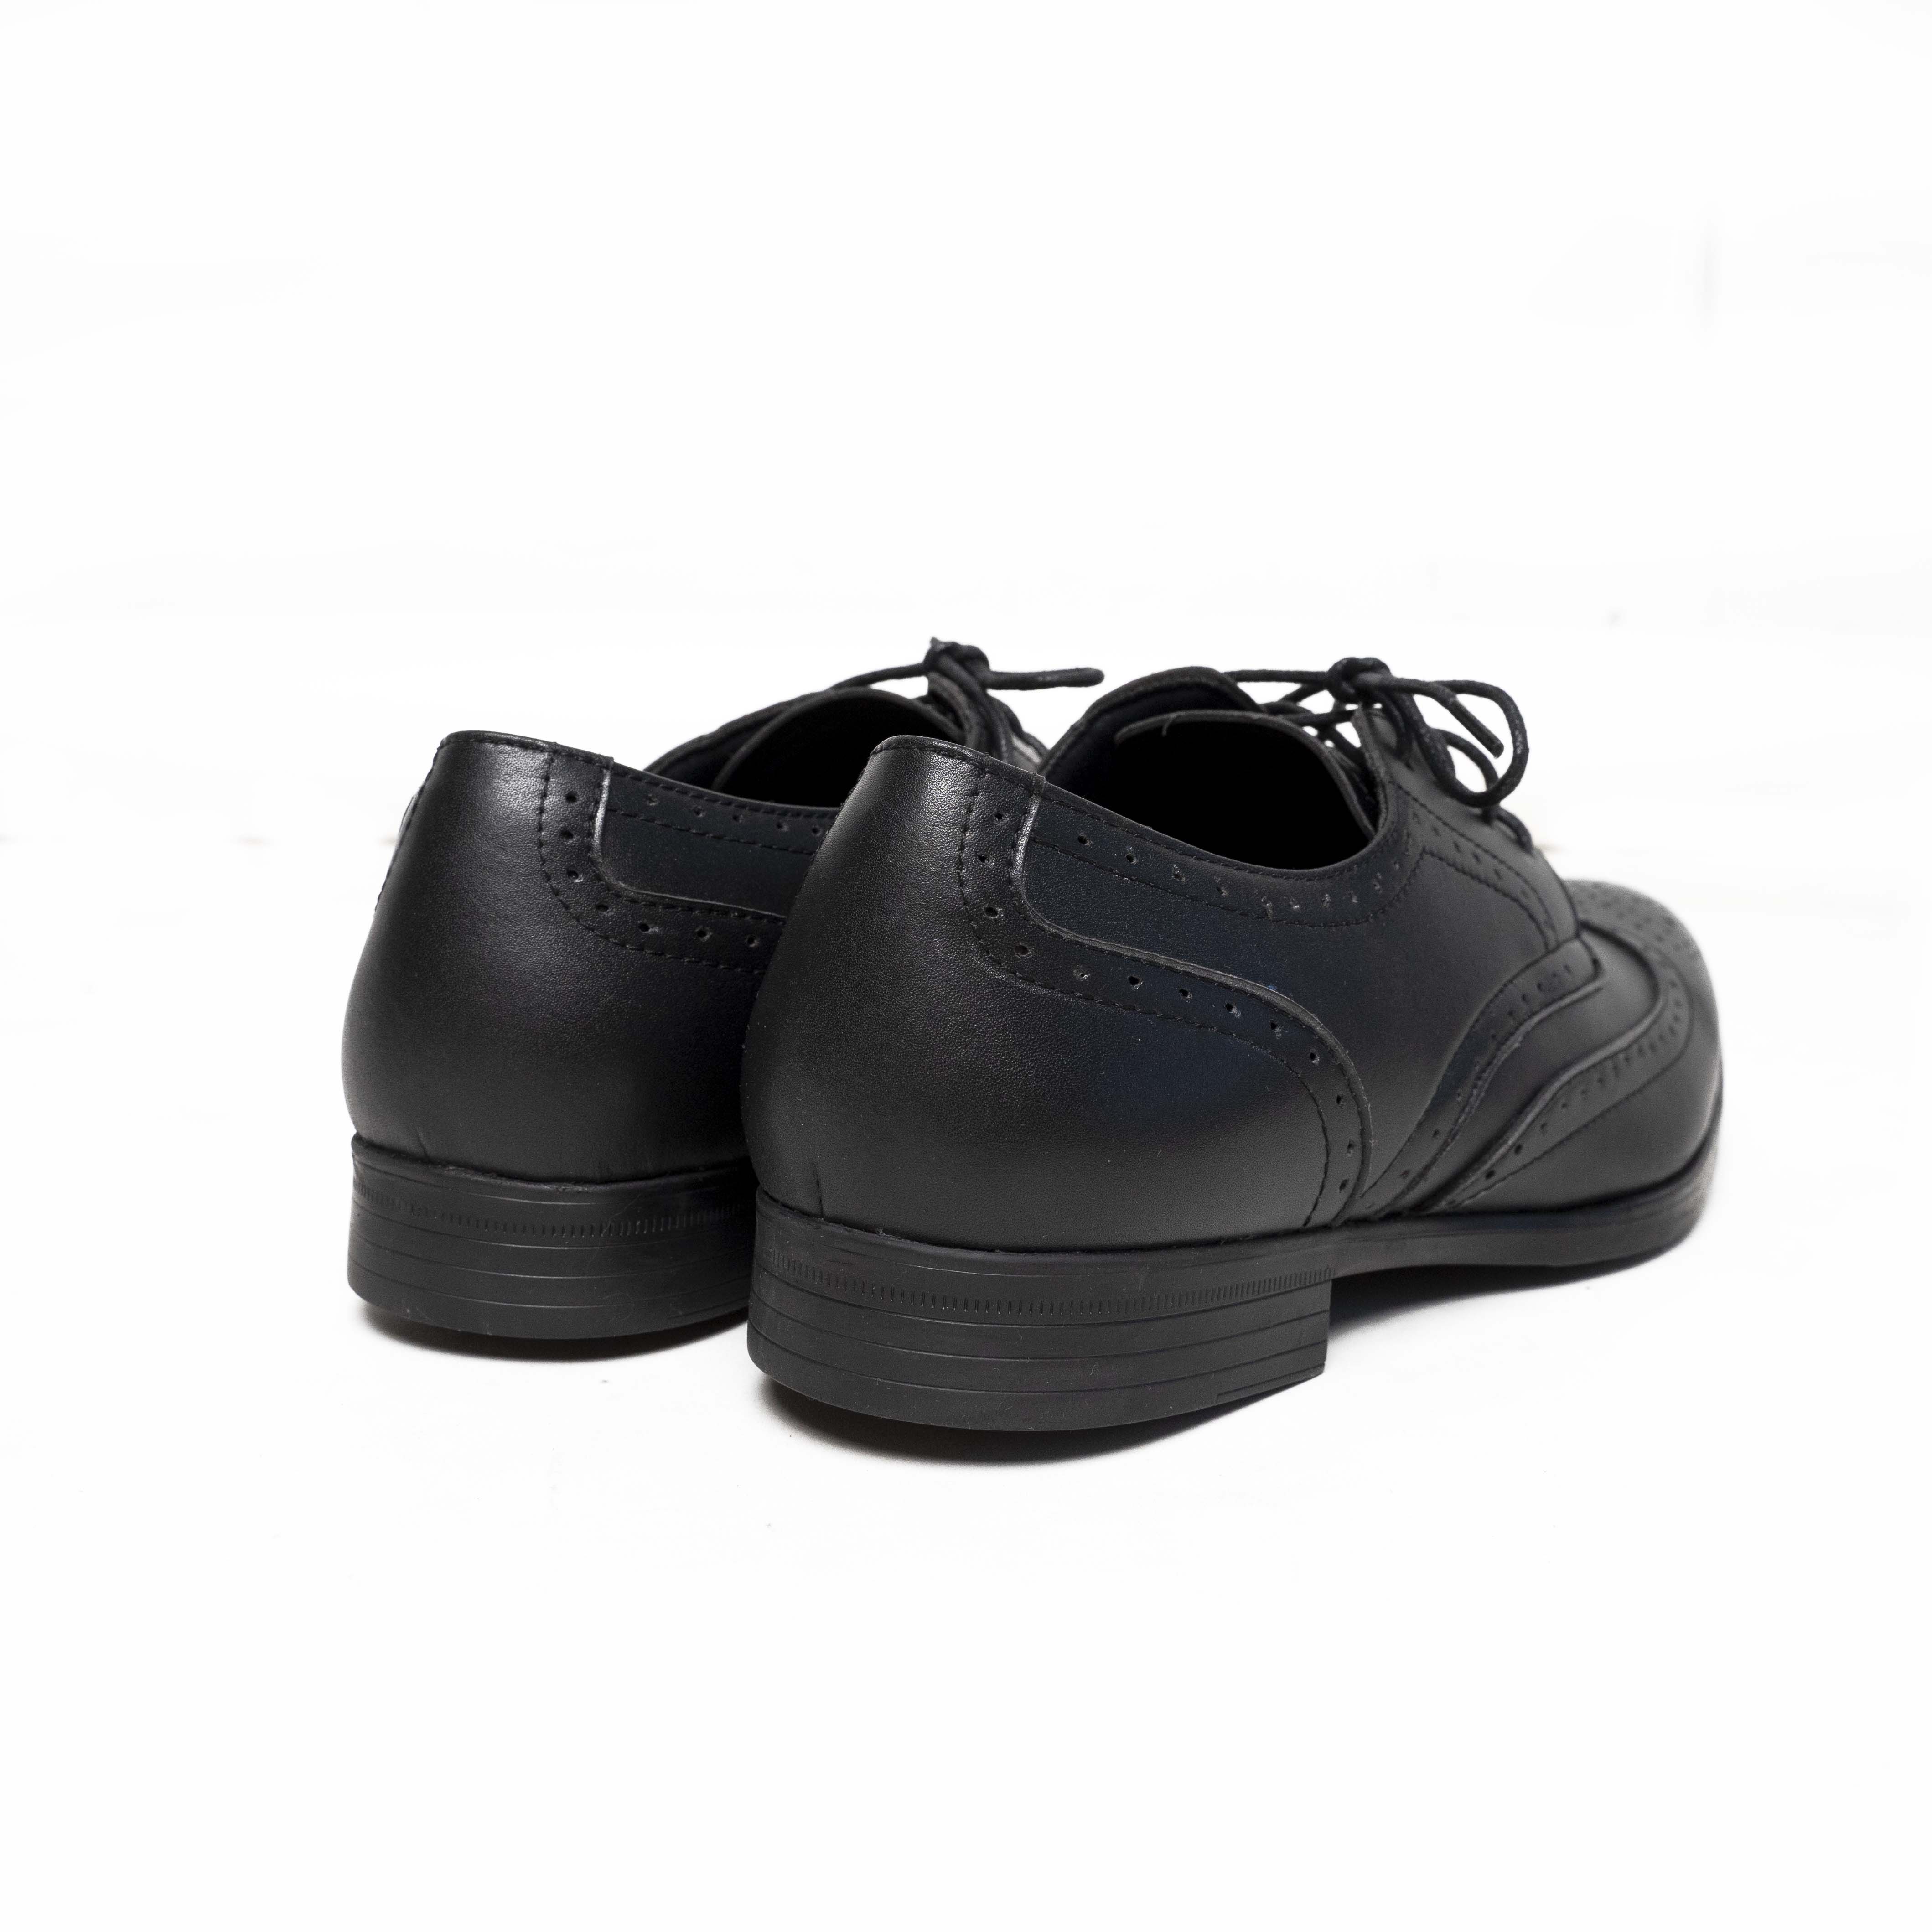 OXFORD WING TIP LEATHER SHOES BLACK